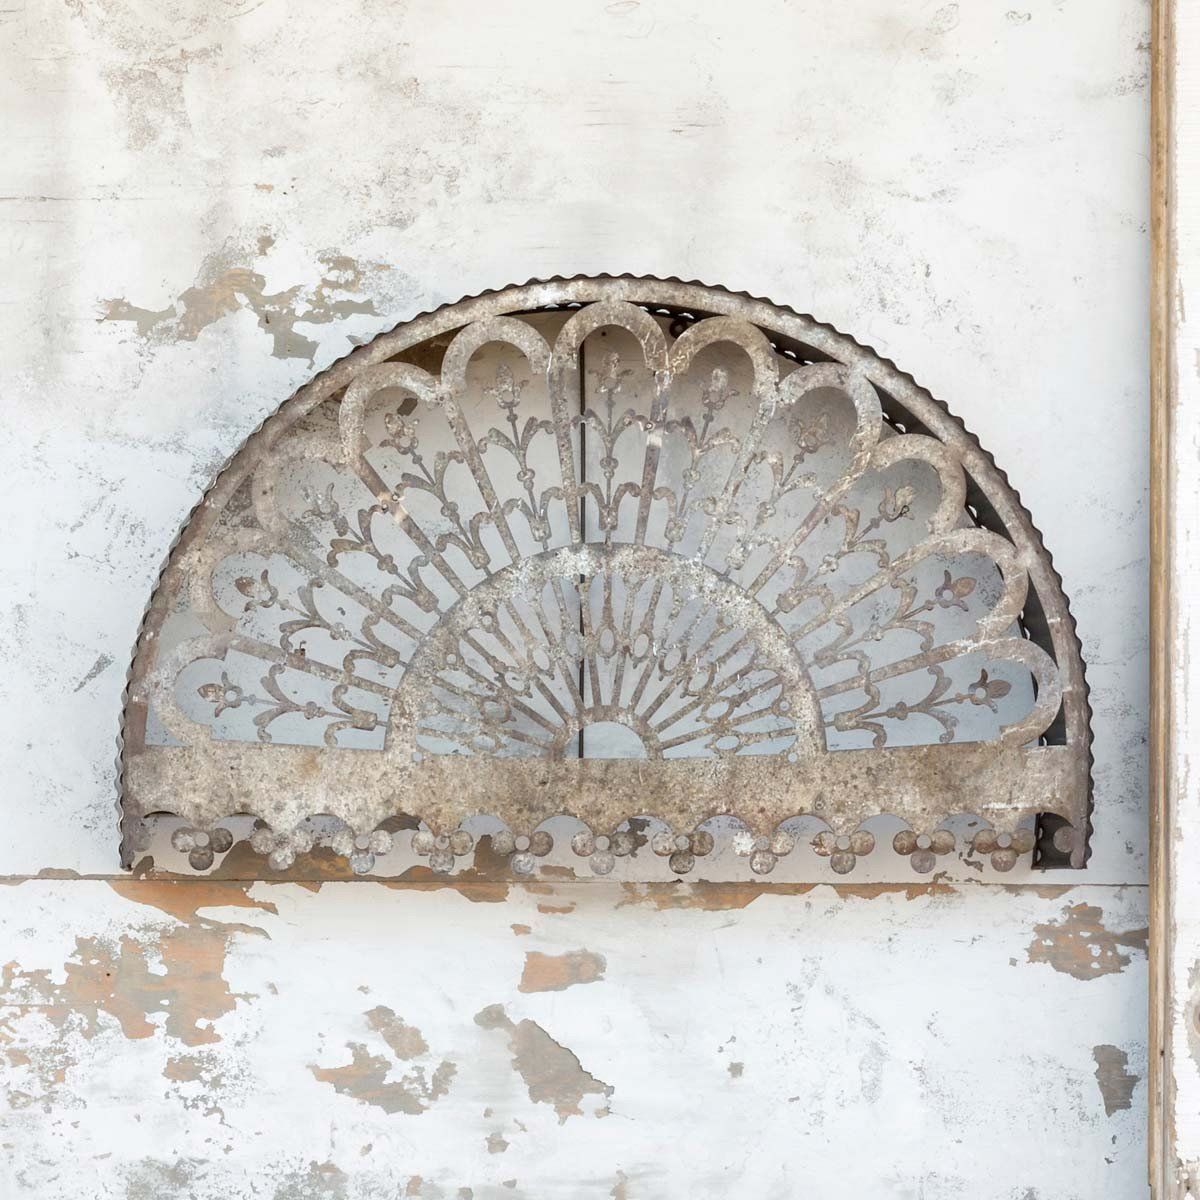 Metal Filigree Arch Relic | Dimensional Wall Art, Iron Accents, Metal Lace Inside Arched Metal Wall Art (View 11 of 15)